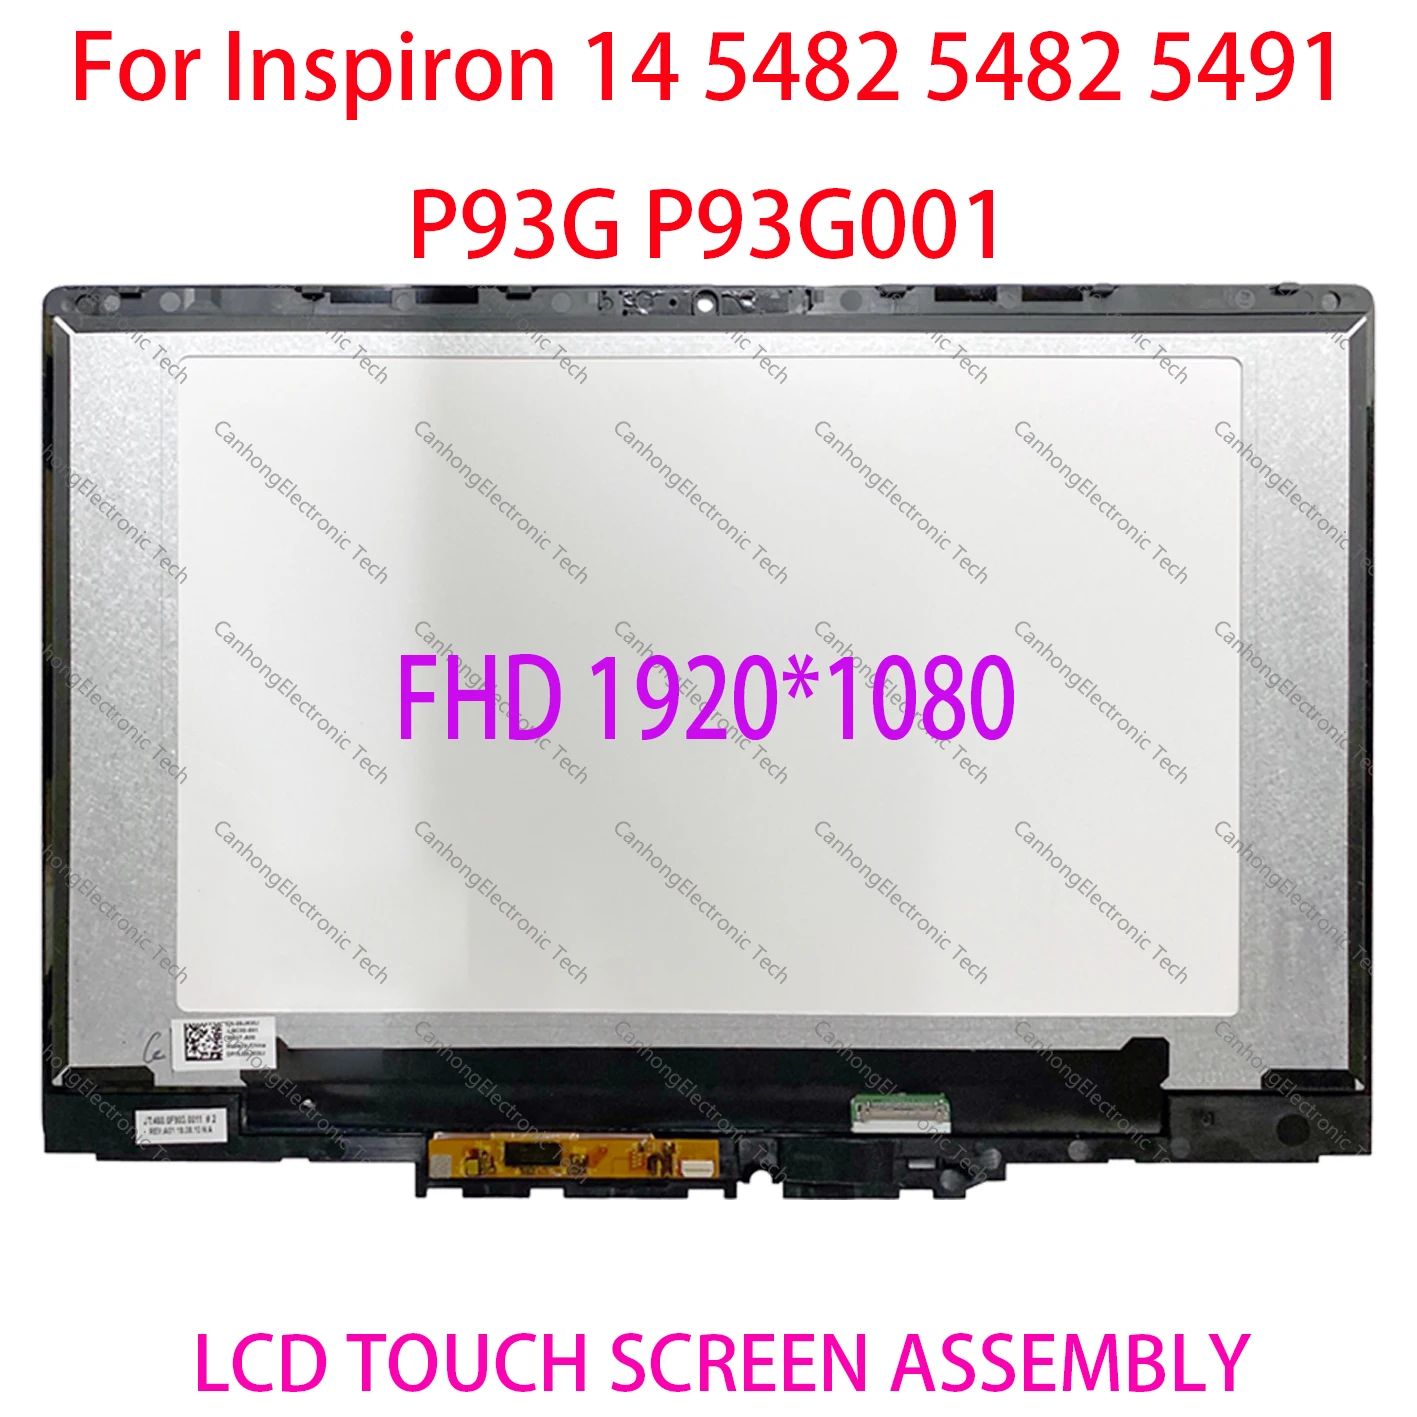 Original For Dell Inspiron 14 5482 5485 5491 2-in-1 P93G P93G001 1920*1080  LCD Touch Digitizer Screen Replacement Assembly